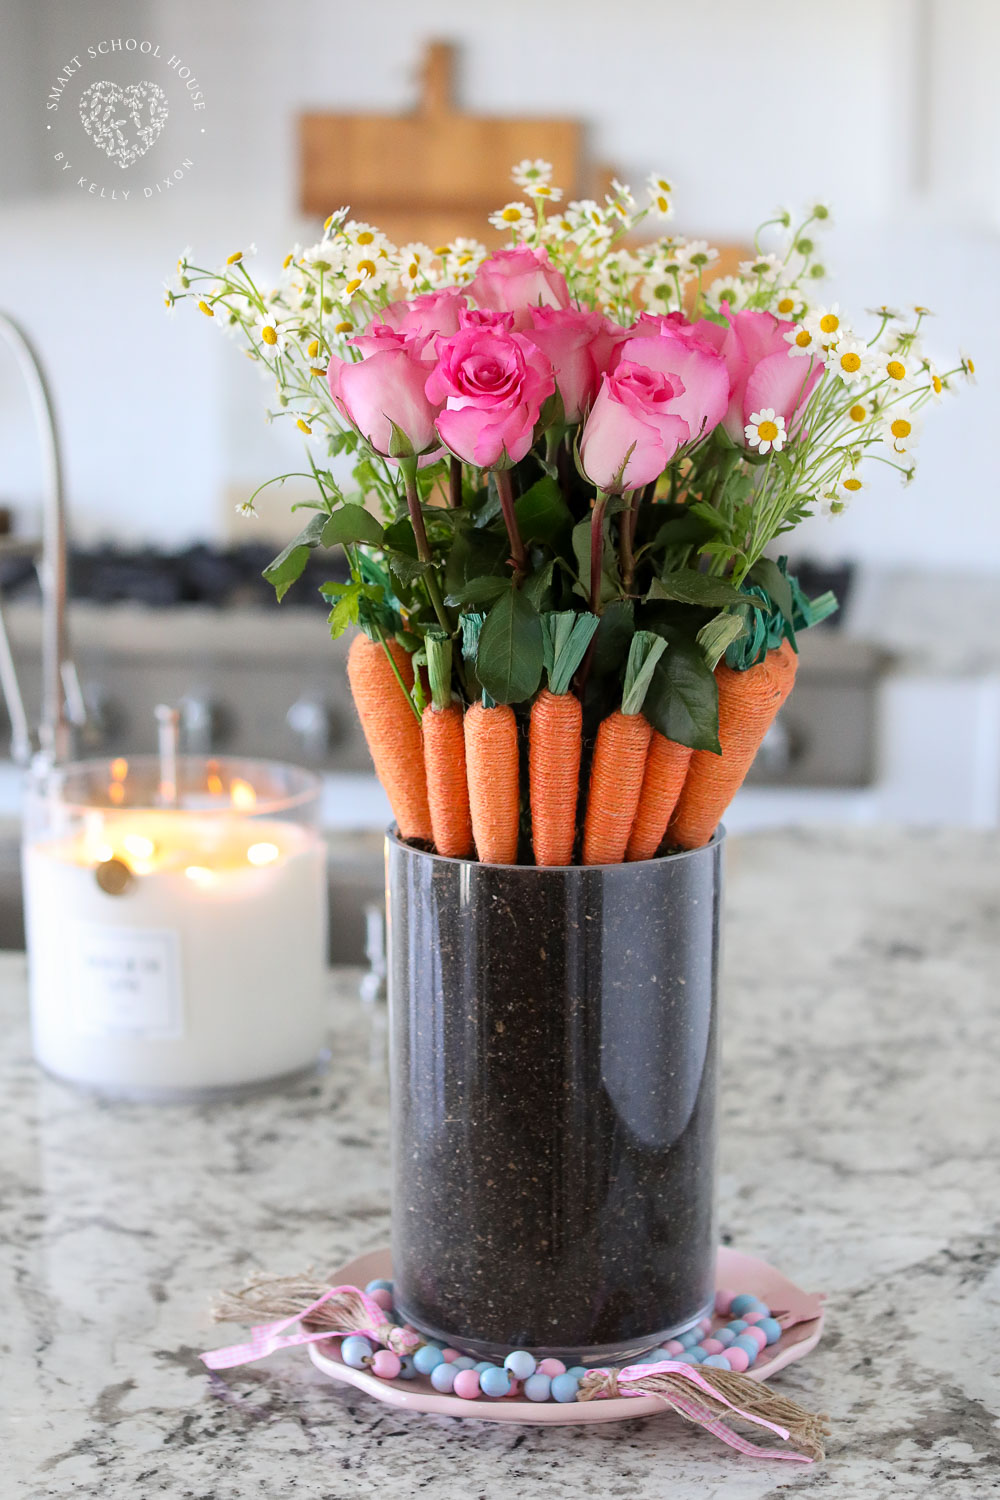 A pretty Carrot Patch Bouquet for Easter and spring! Fresh flowers sit inside of a hidden vase surrounded by carrots nestled in soil.